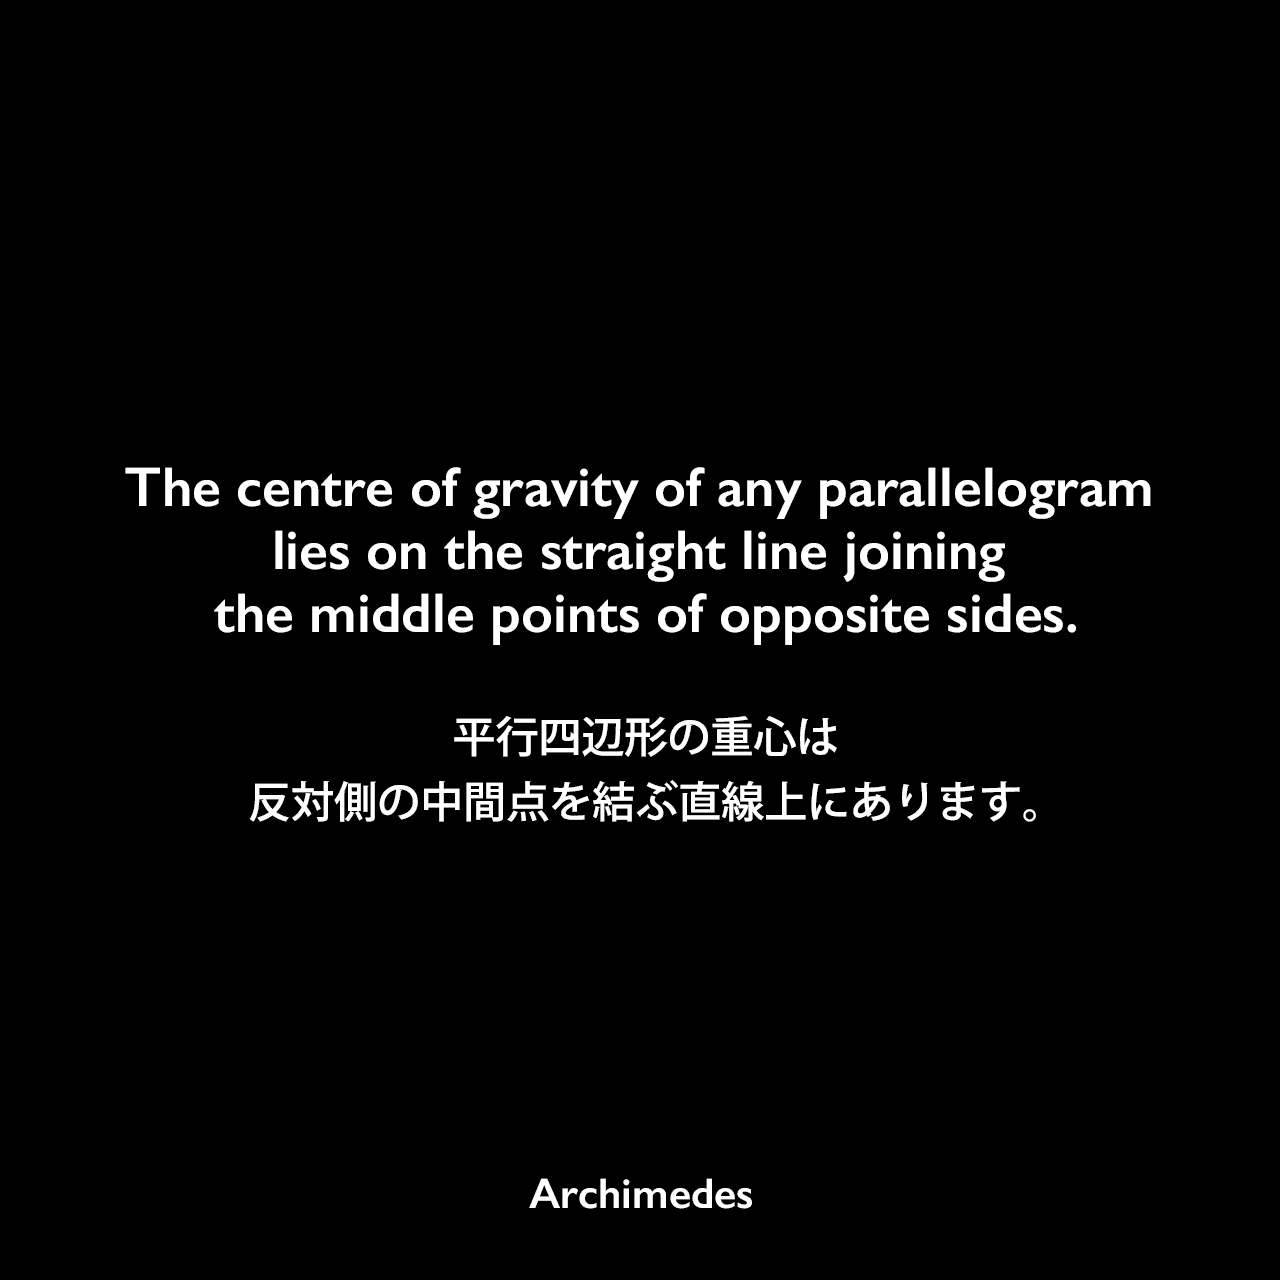 The centre of gravity of any parallelogram lies on the straight line joining the middle points of opposite sides.平行四辺形の重心は、反対側の中間点を結ぶ直線上にあります。- アルキメデスの論文「On the Equilibrium of Planes」よりArchimedes